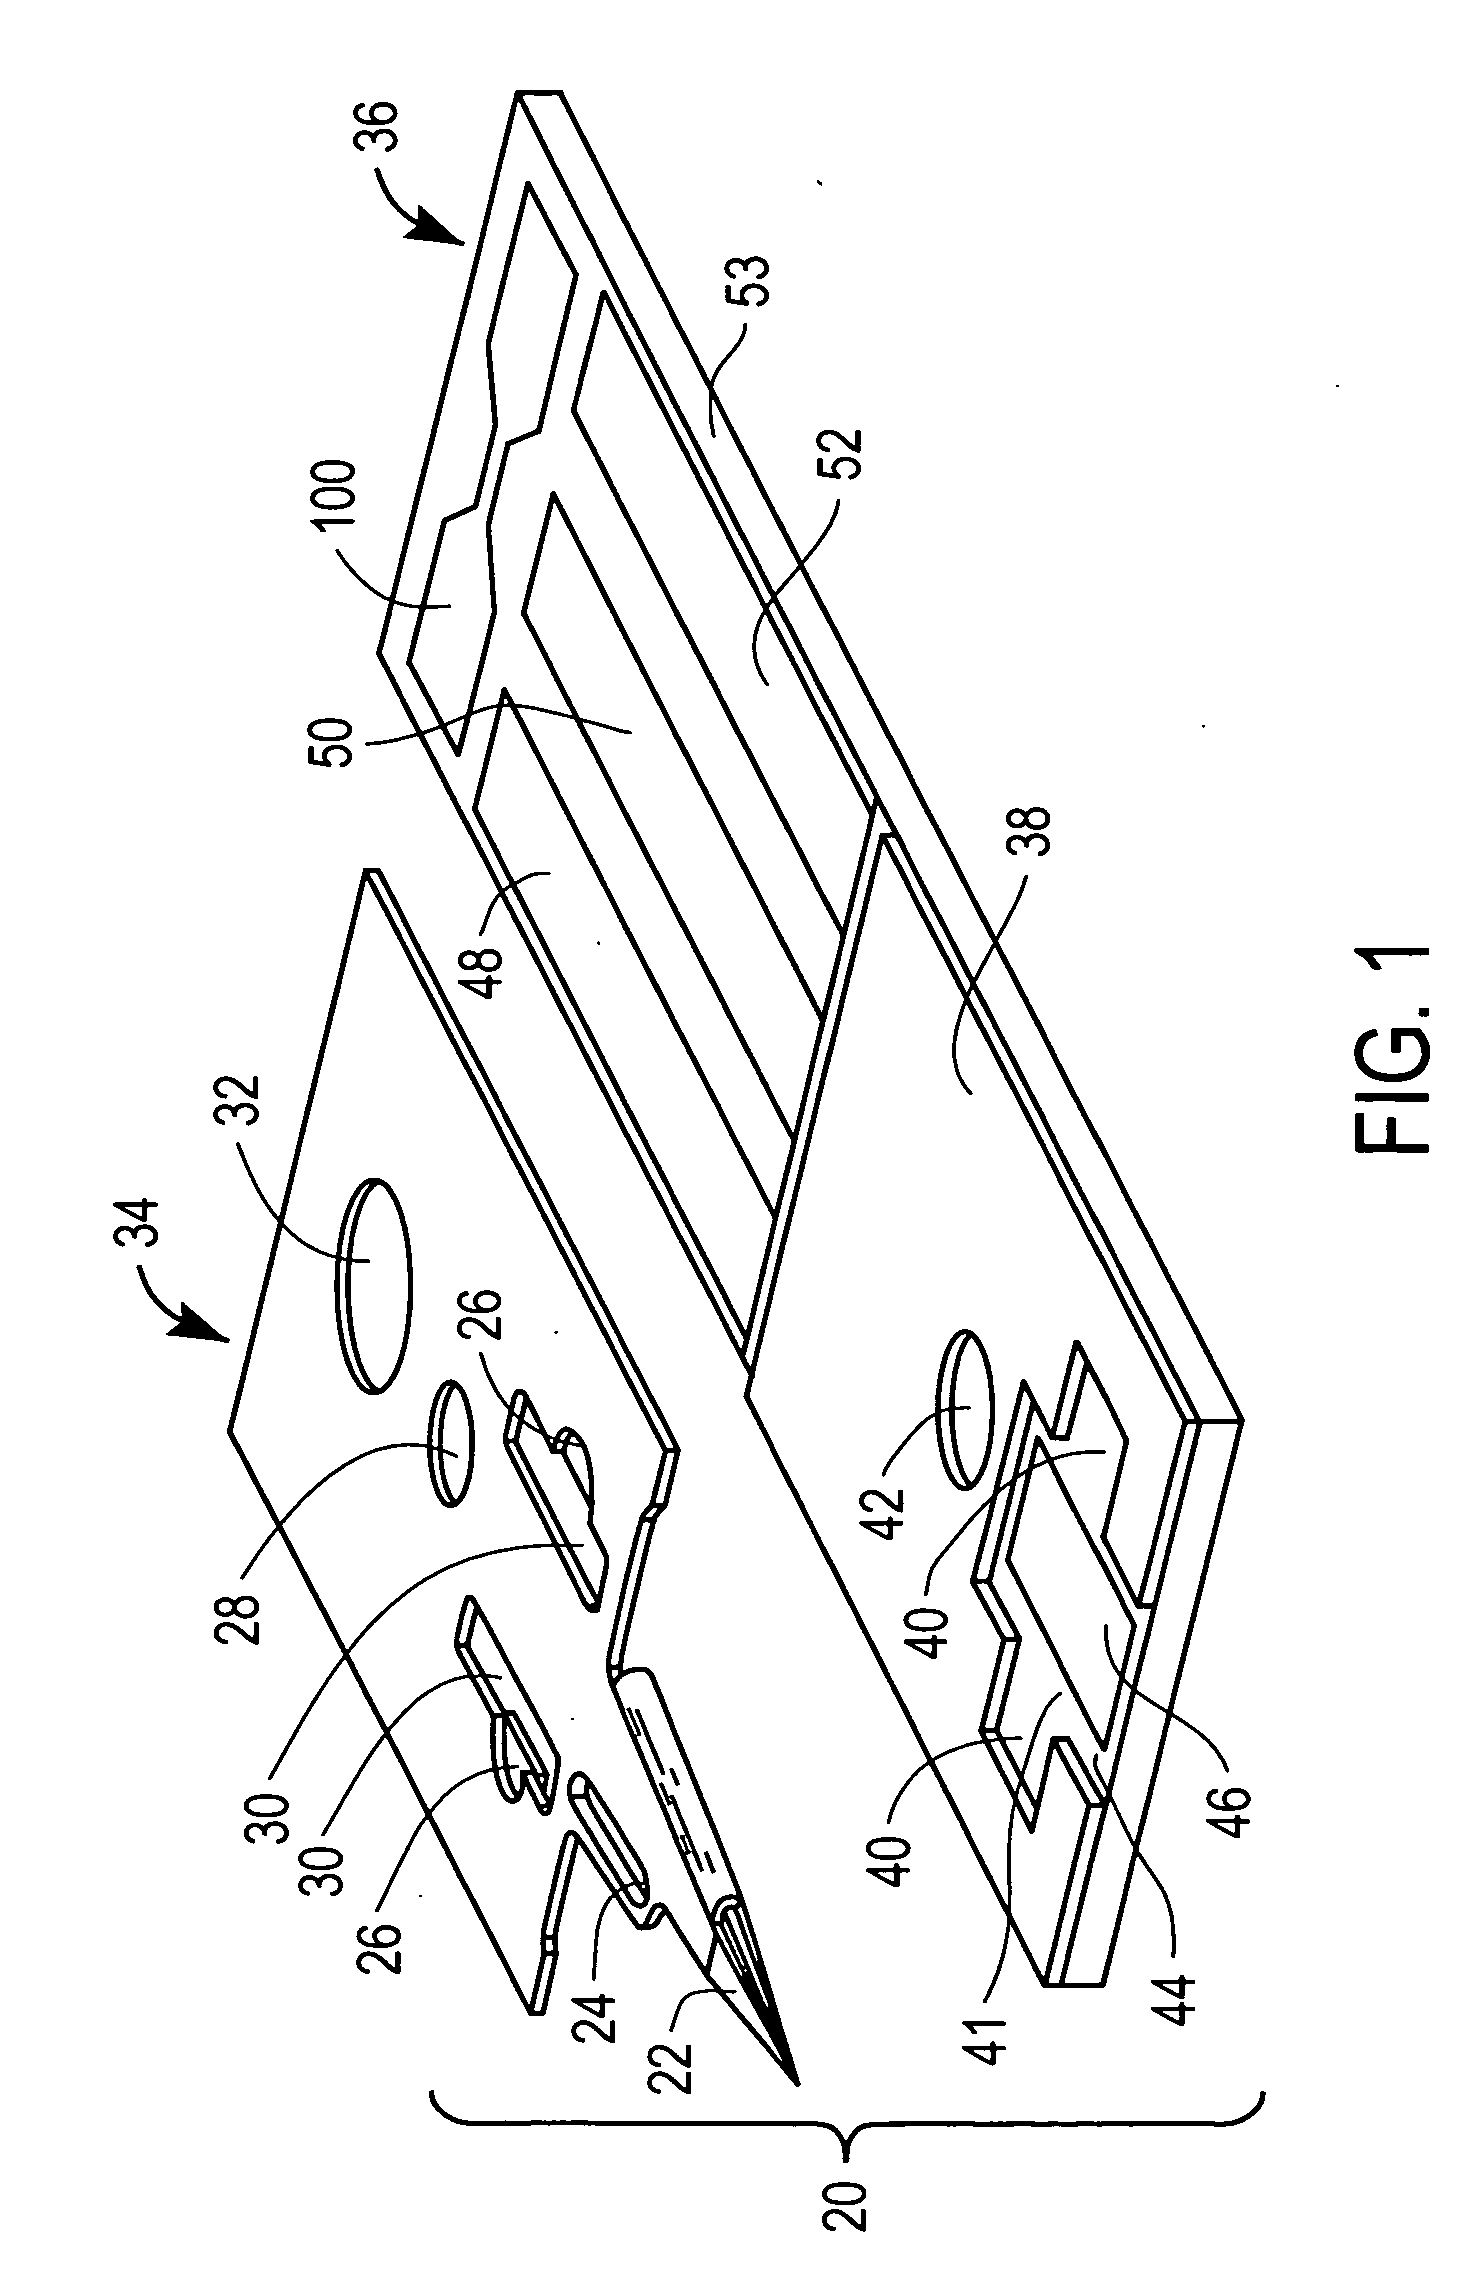 Method of preventing reuse in an analyte measuring system